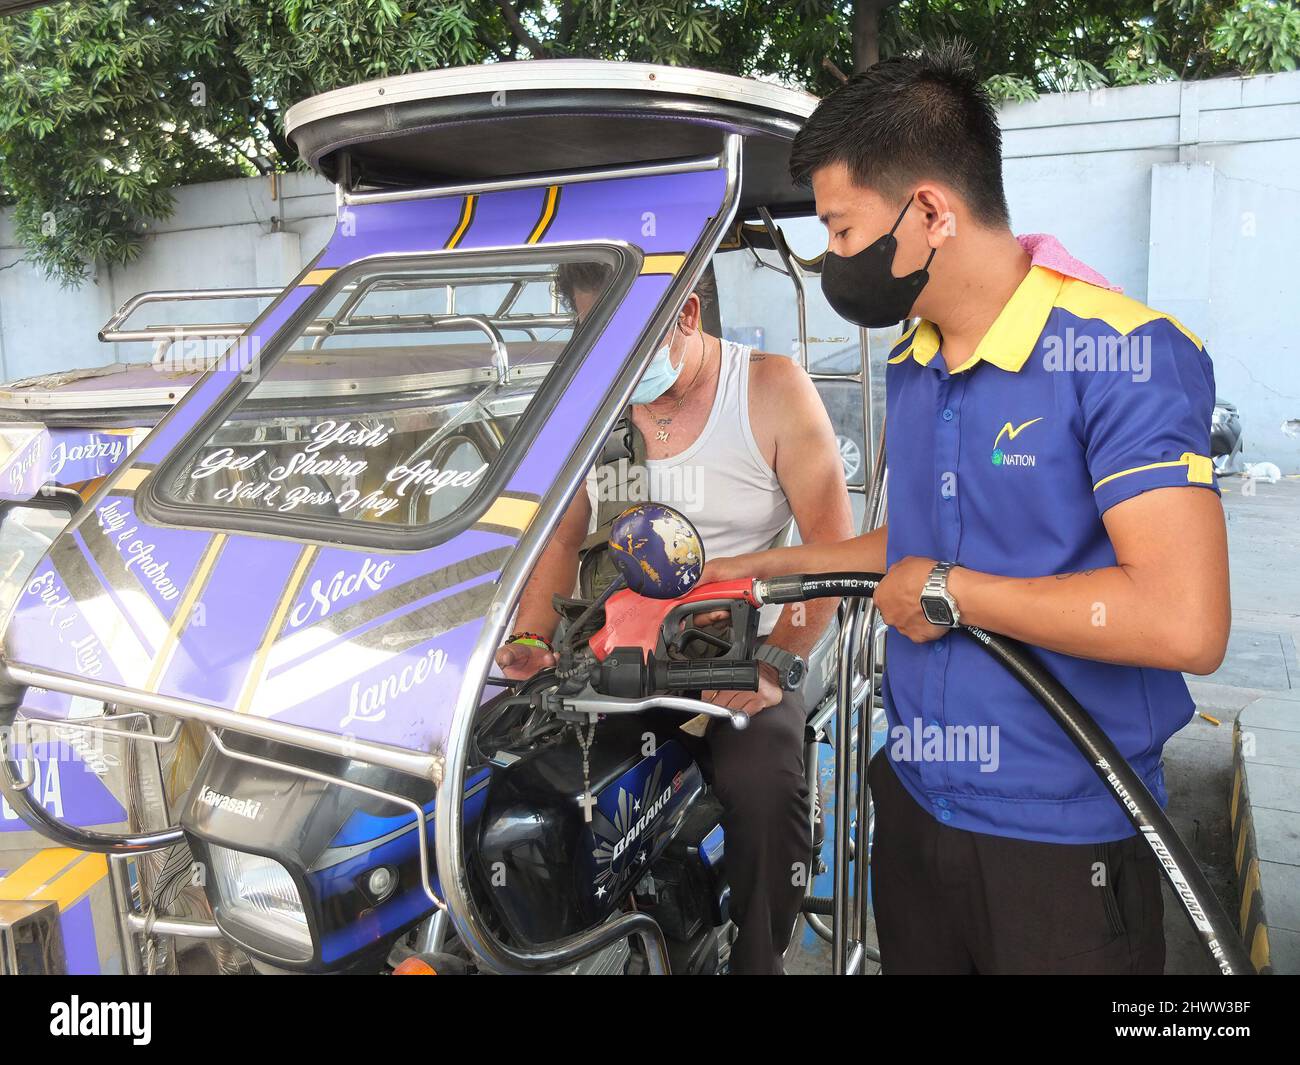 A tricycle is being refueled by a gasoline attendant. The Philippines is experiencing soaring prices in oil and other fuel products amid the Russia-Ukraine conflict. The Department of energy warns the public to brace for much more higher cost of fuel in the days ahead. they said this price fallout is not only happening to the Philippines but also in other parts of the world. The Philippine Government is preparing contingency plan to subsidize the fuel costs for public transportation sector, farmers and fisher folk. Stock Photo